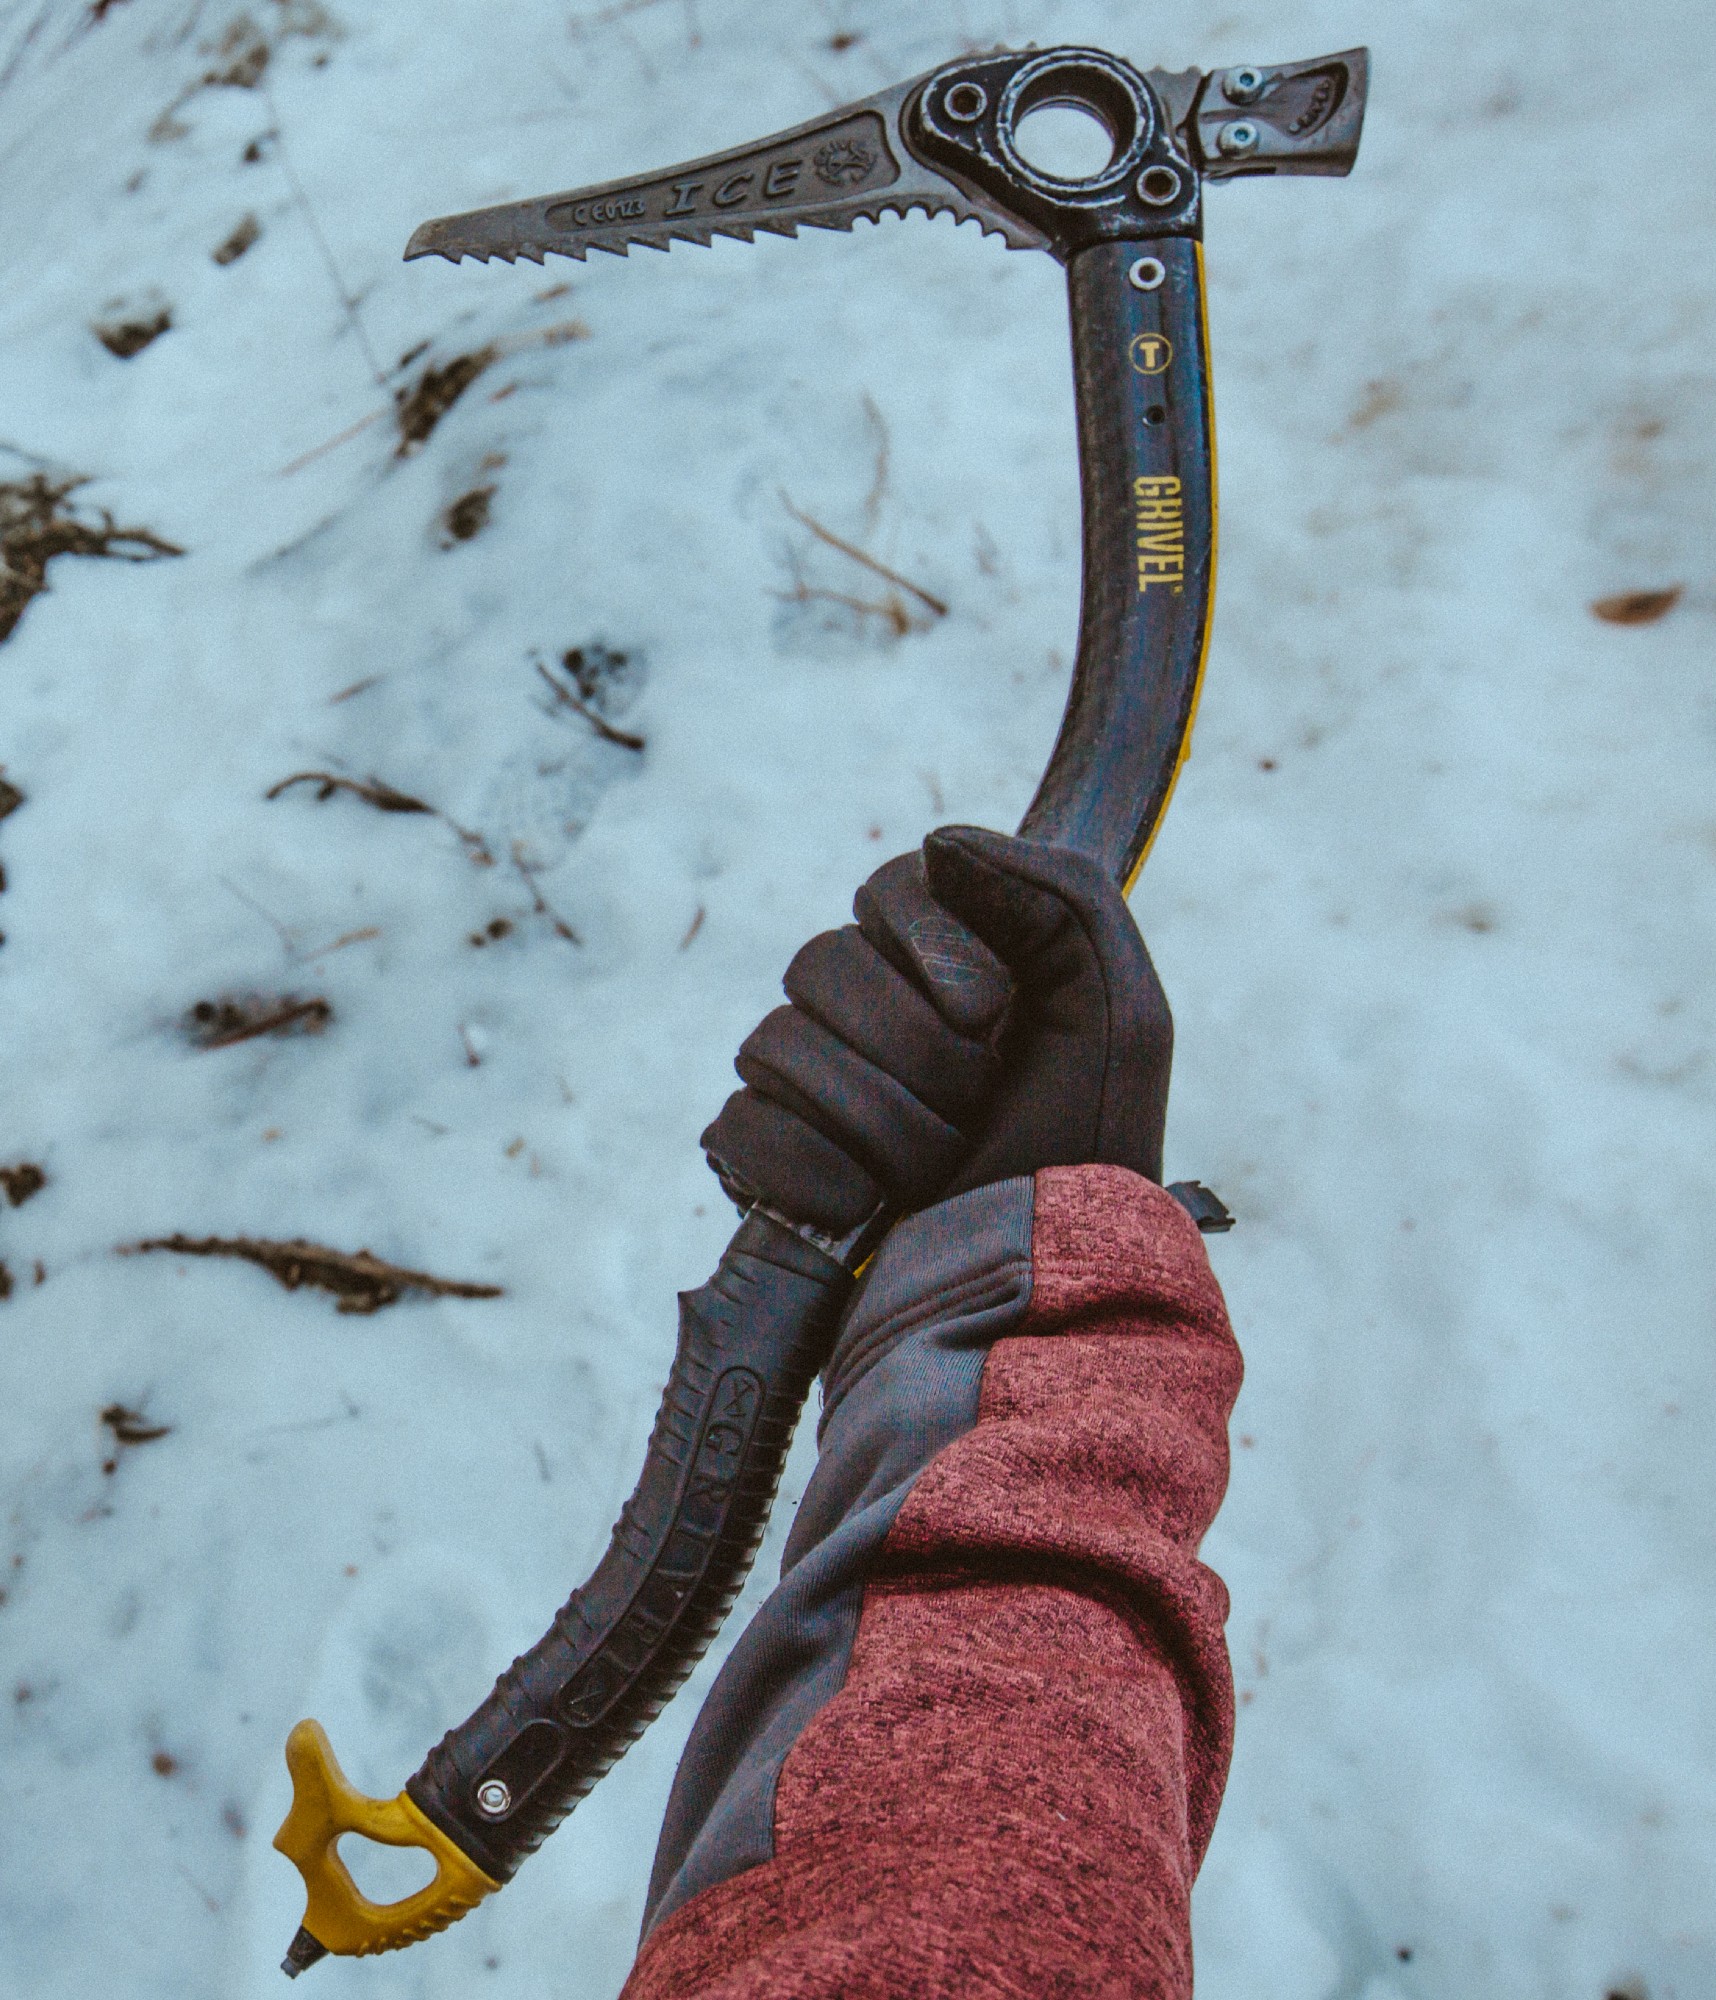 Grivel North Machine Mountaineering Ice Axe w/ Hammer